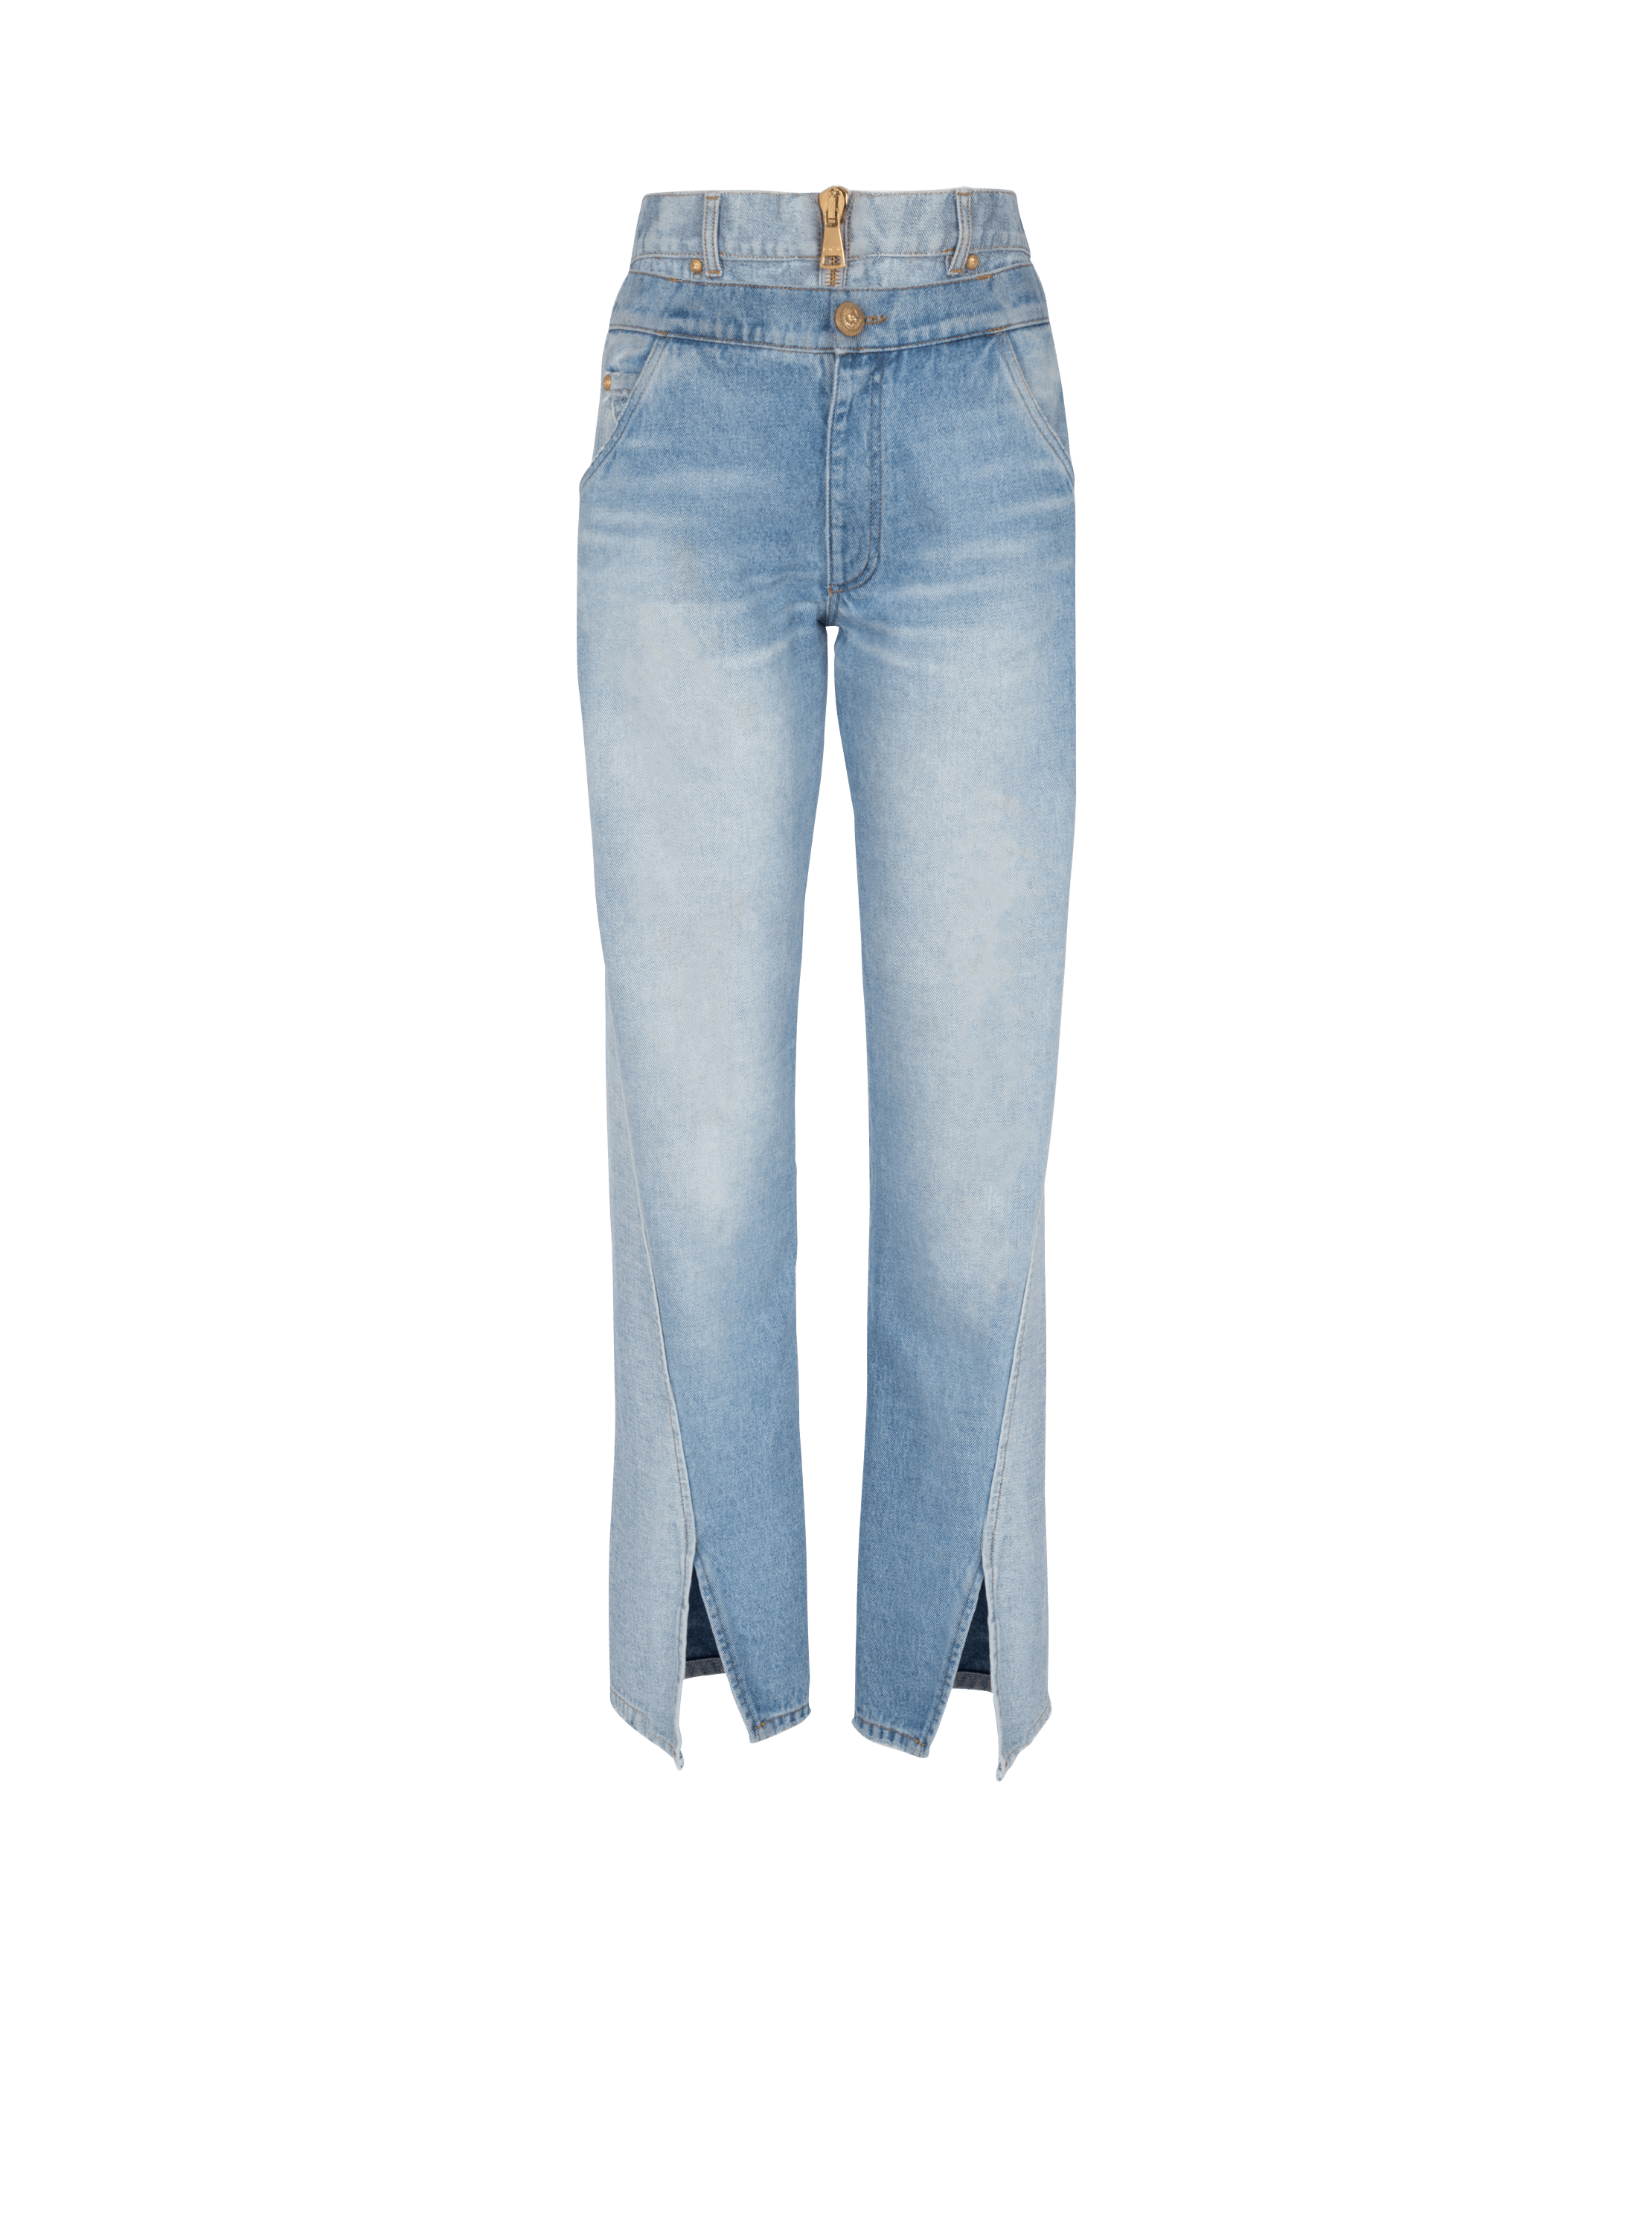 At sige sandheden Opdater definitive Two-in-one faded jeans blue - Women | BALMAIN